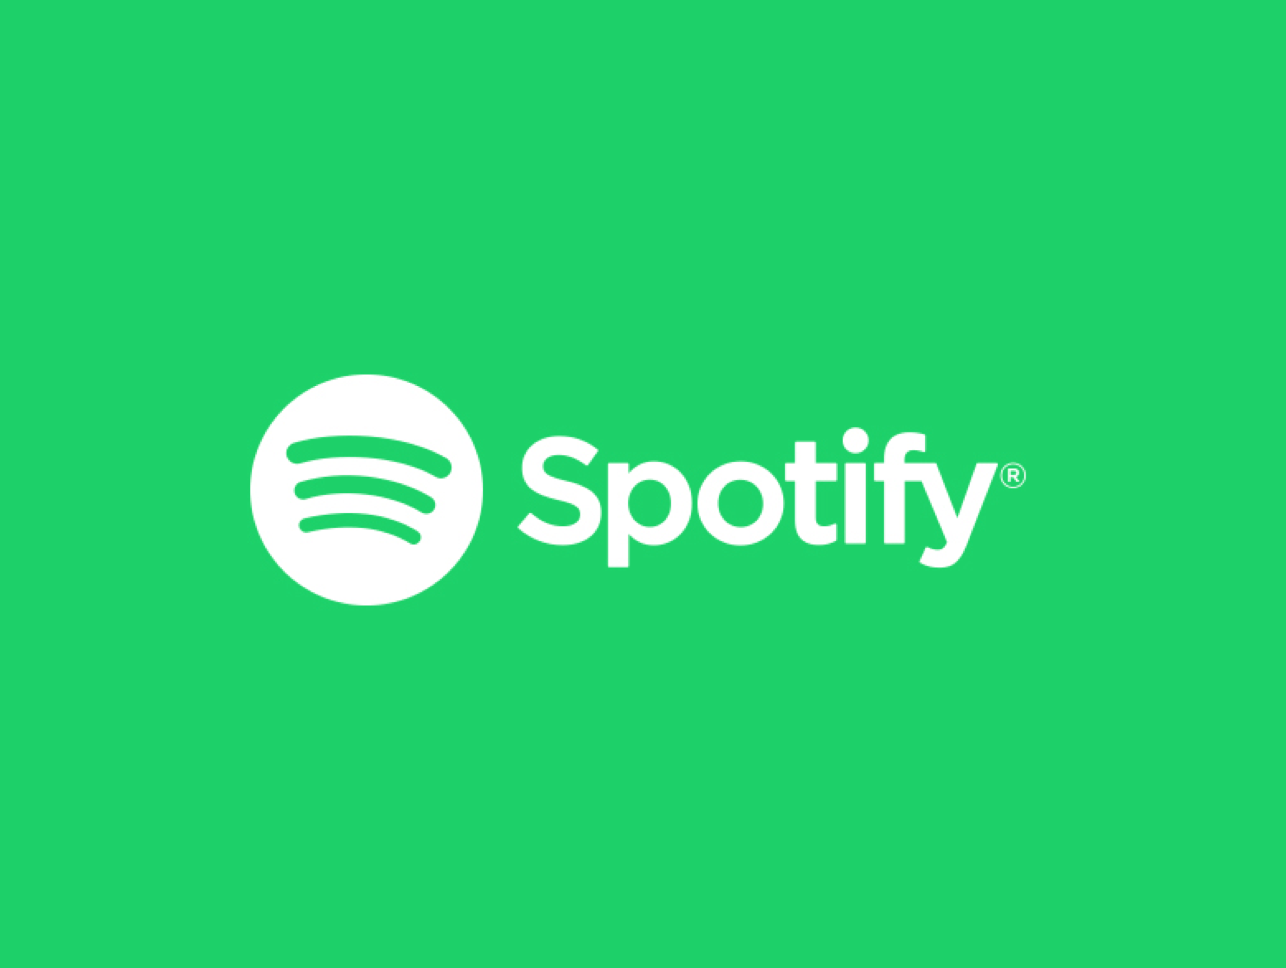 iTunes Green Logo - Spotify had no idea how much you'd hate its logo color